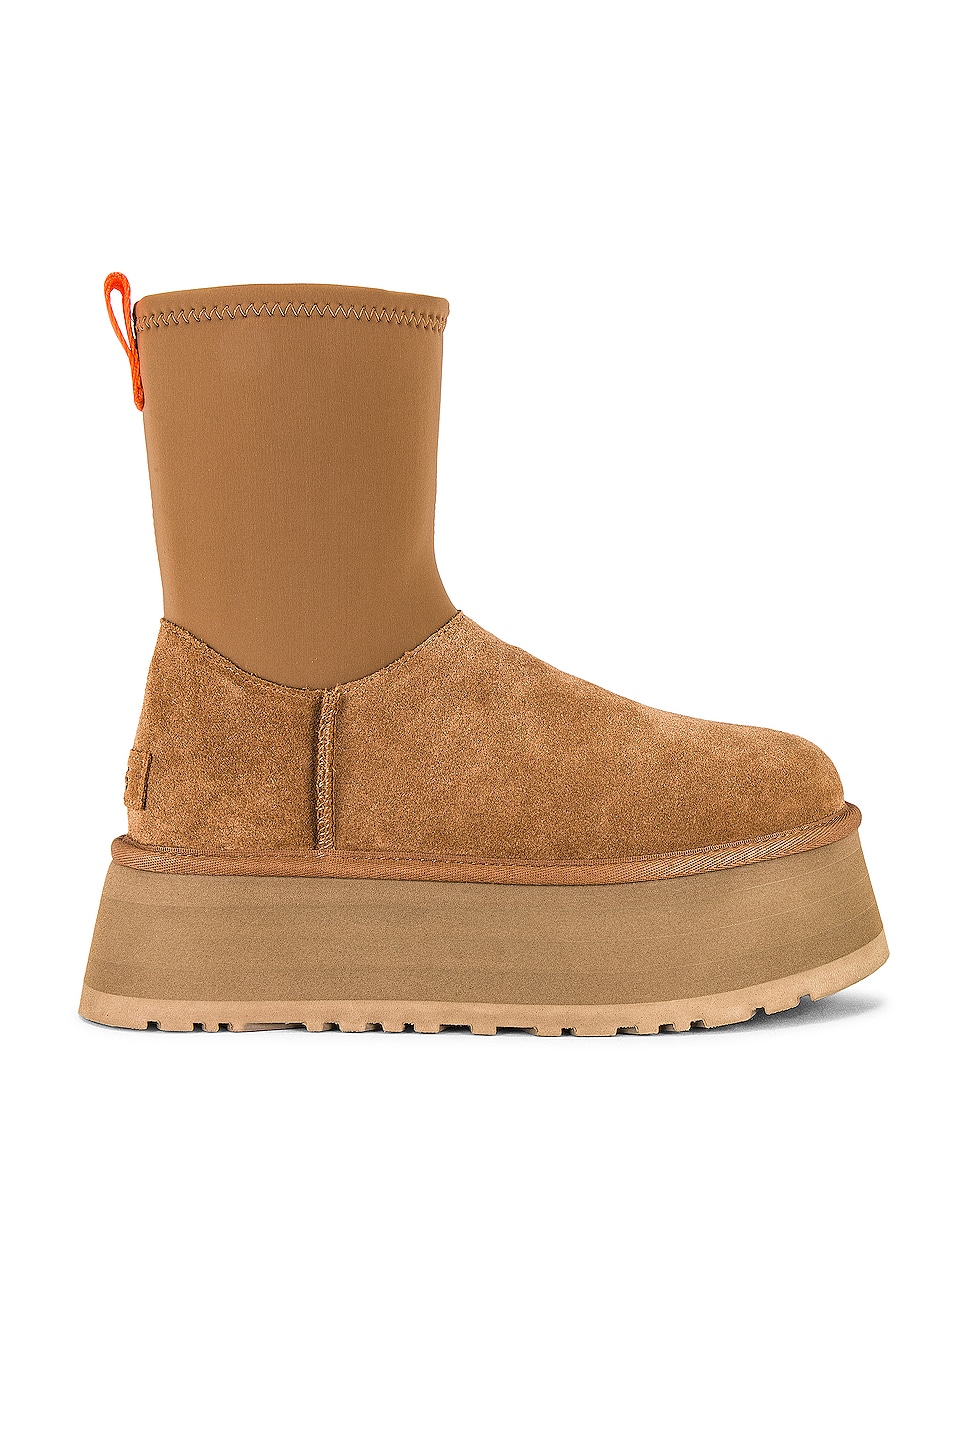 Image 1 of UGG Classic Dipper Boot in Chestnut